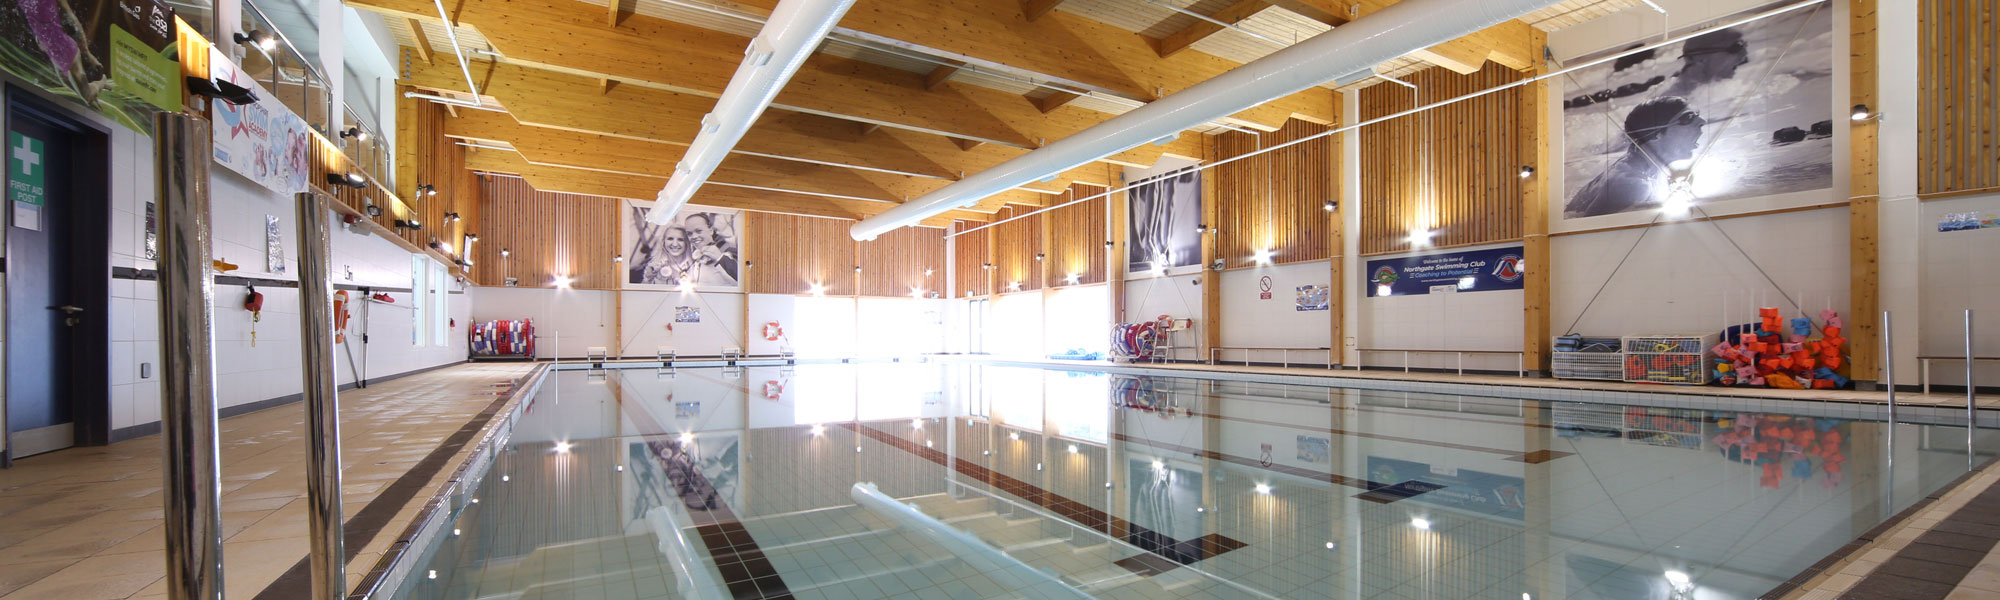 Swimming pool at William Brookes School in Much Wenlock, Shropshire